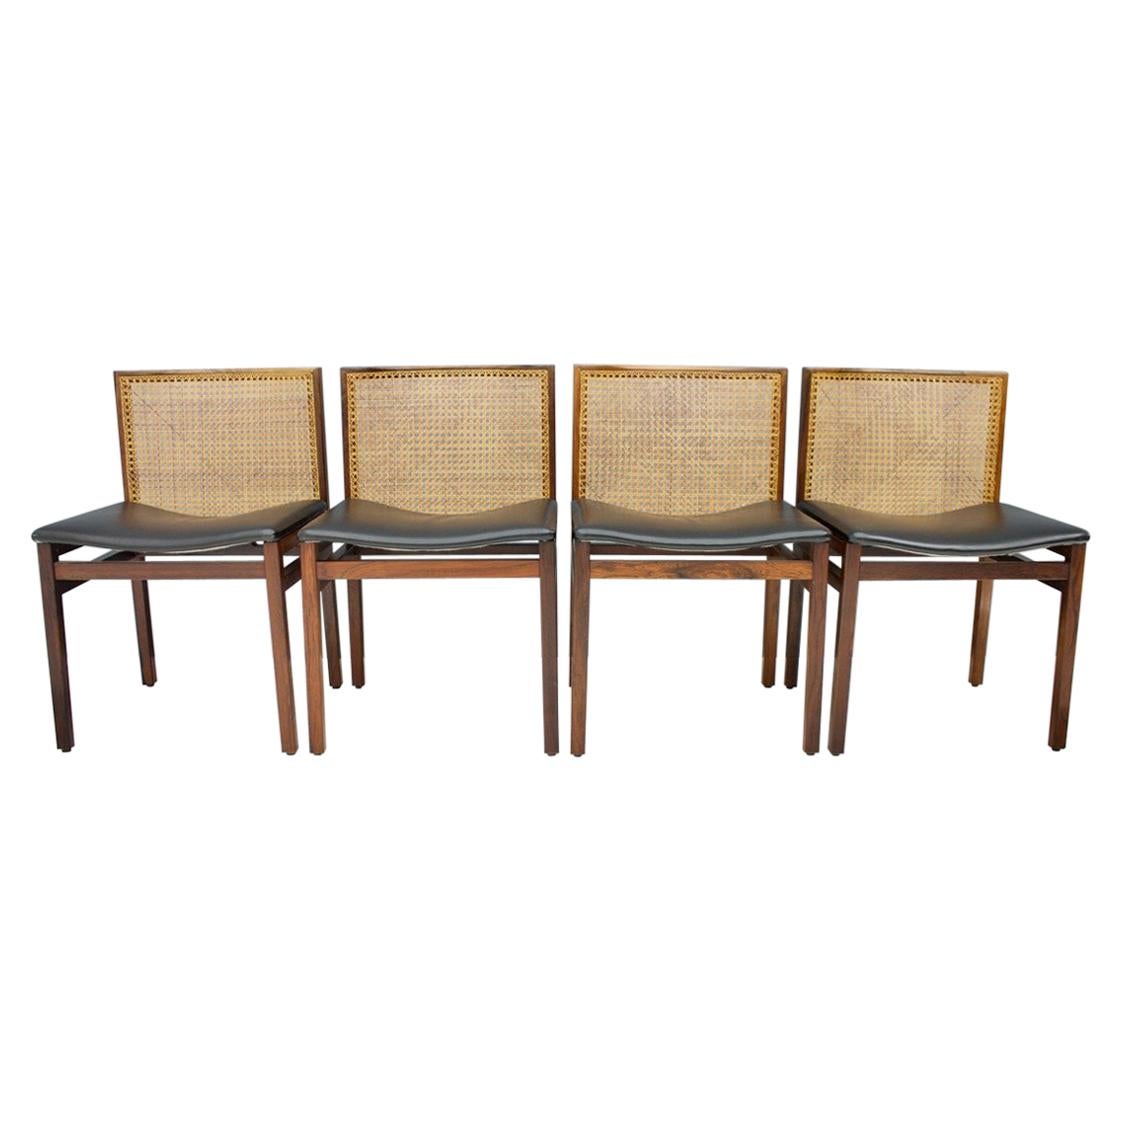 Tito Agnoli Dining Room Chairs, Italy, 1960s For Sale